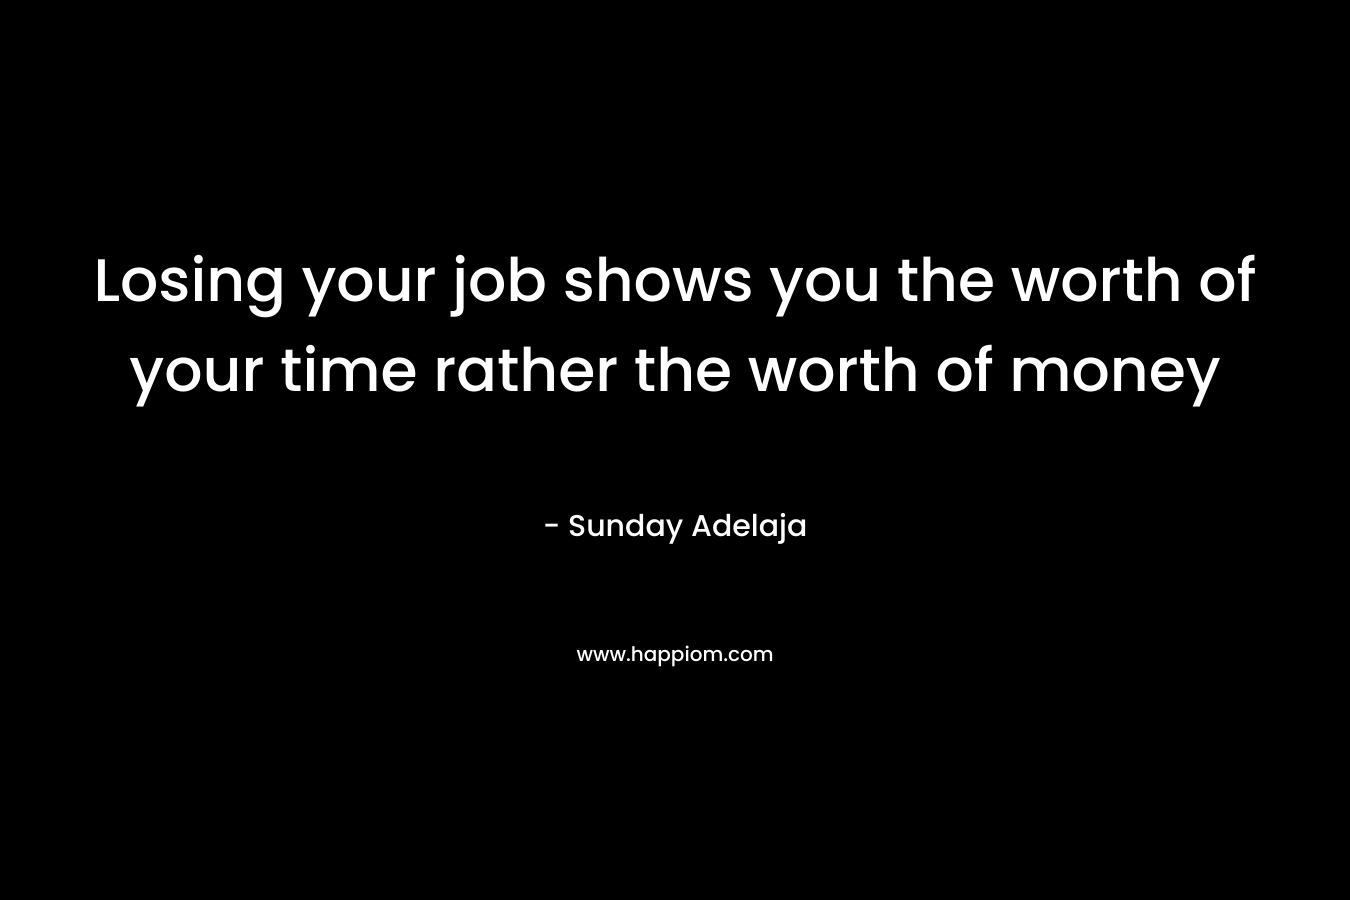 Losing your job shows you the worth of your time rather the worth of money